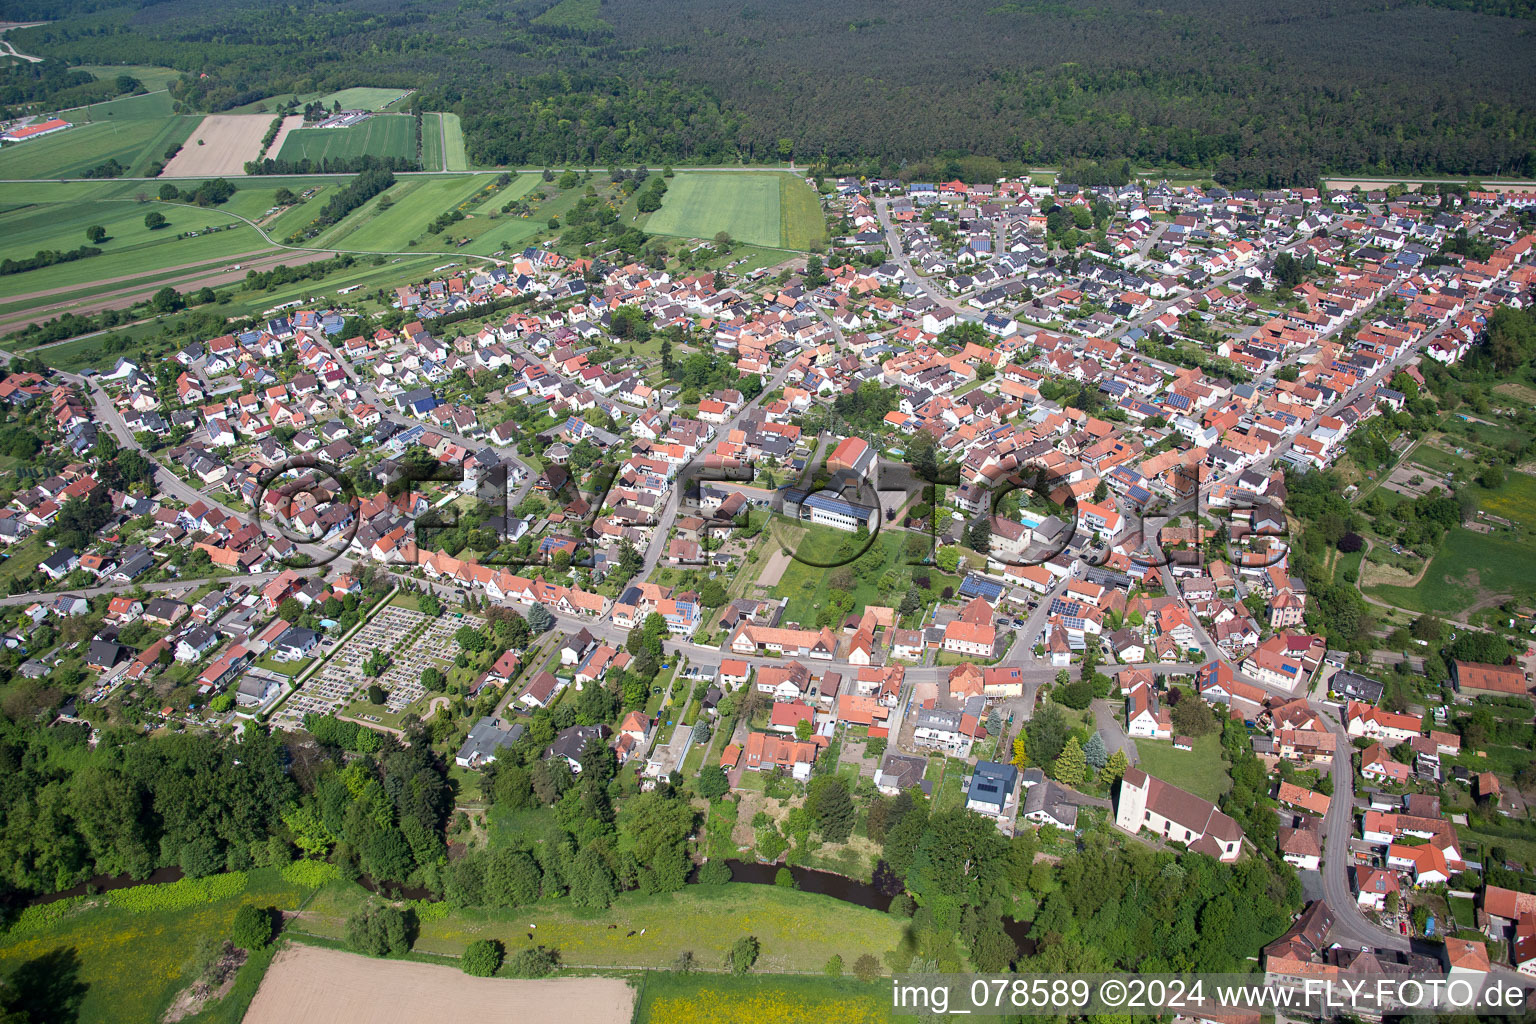 Aerial view of Village view in Berg (Pfalz) in the state Rhineland-Palatinate